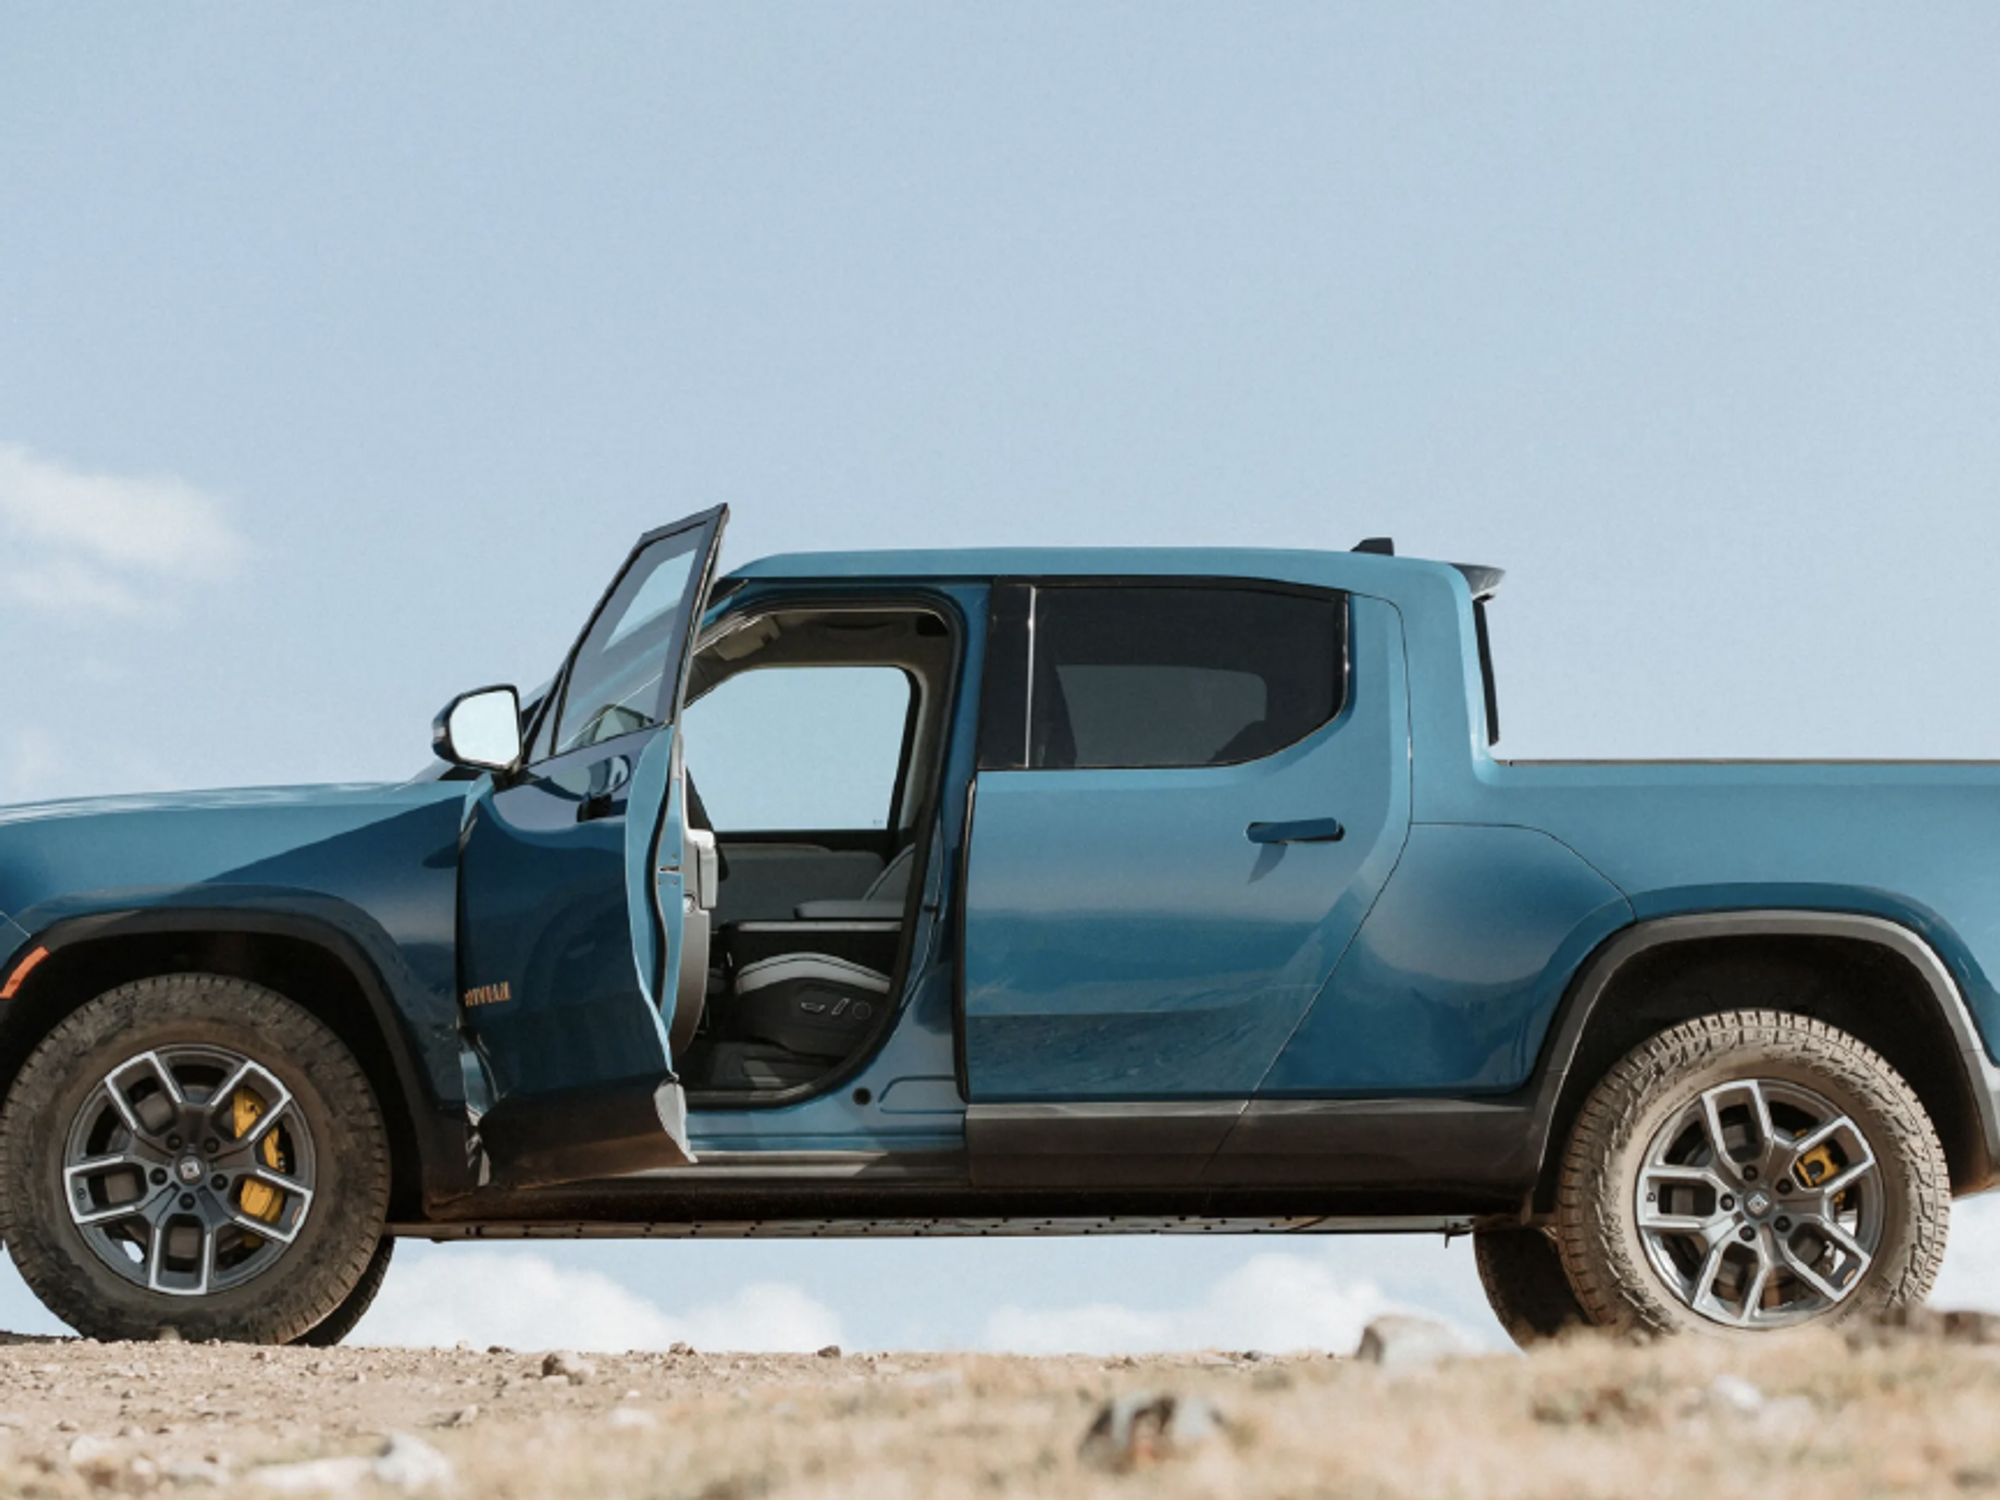 Rivian Is Ineligible for the Inflation Reduction Act’s $7,500 Rebate. Here’s What that Means for the Automaker